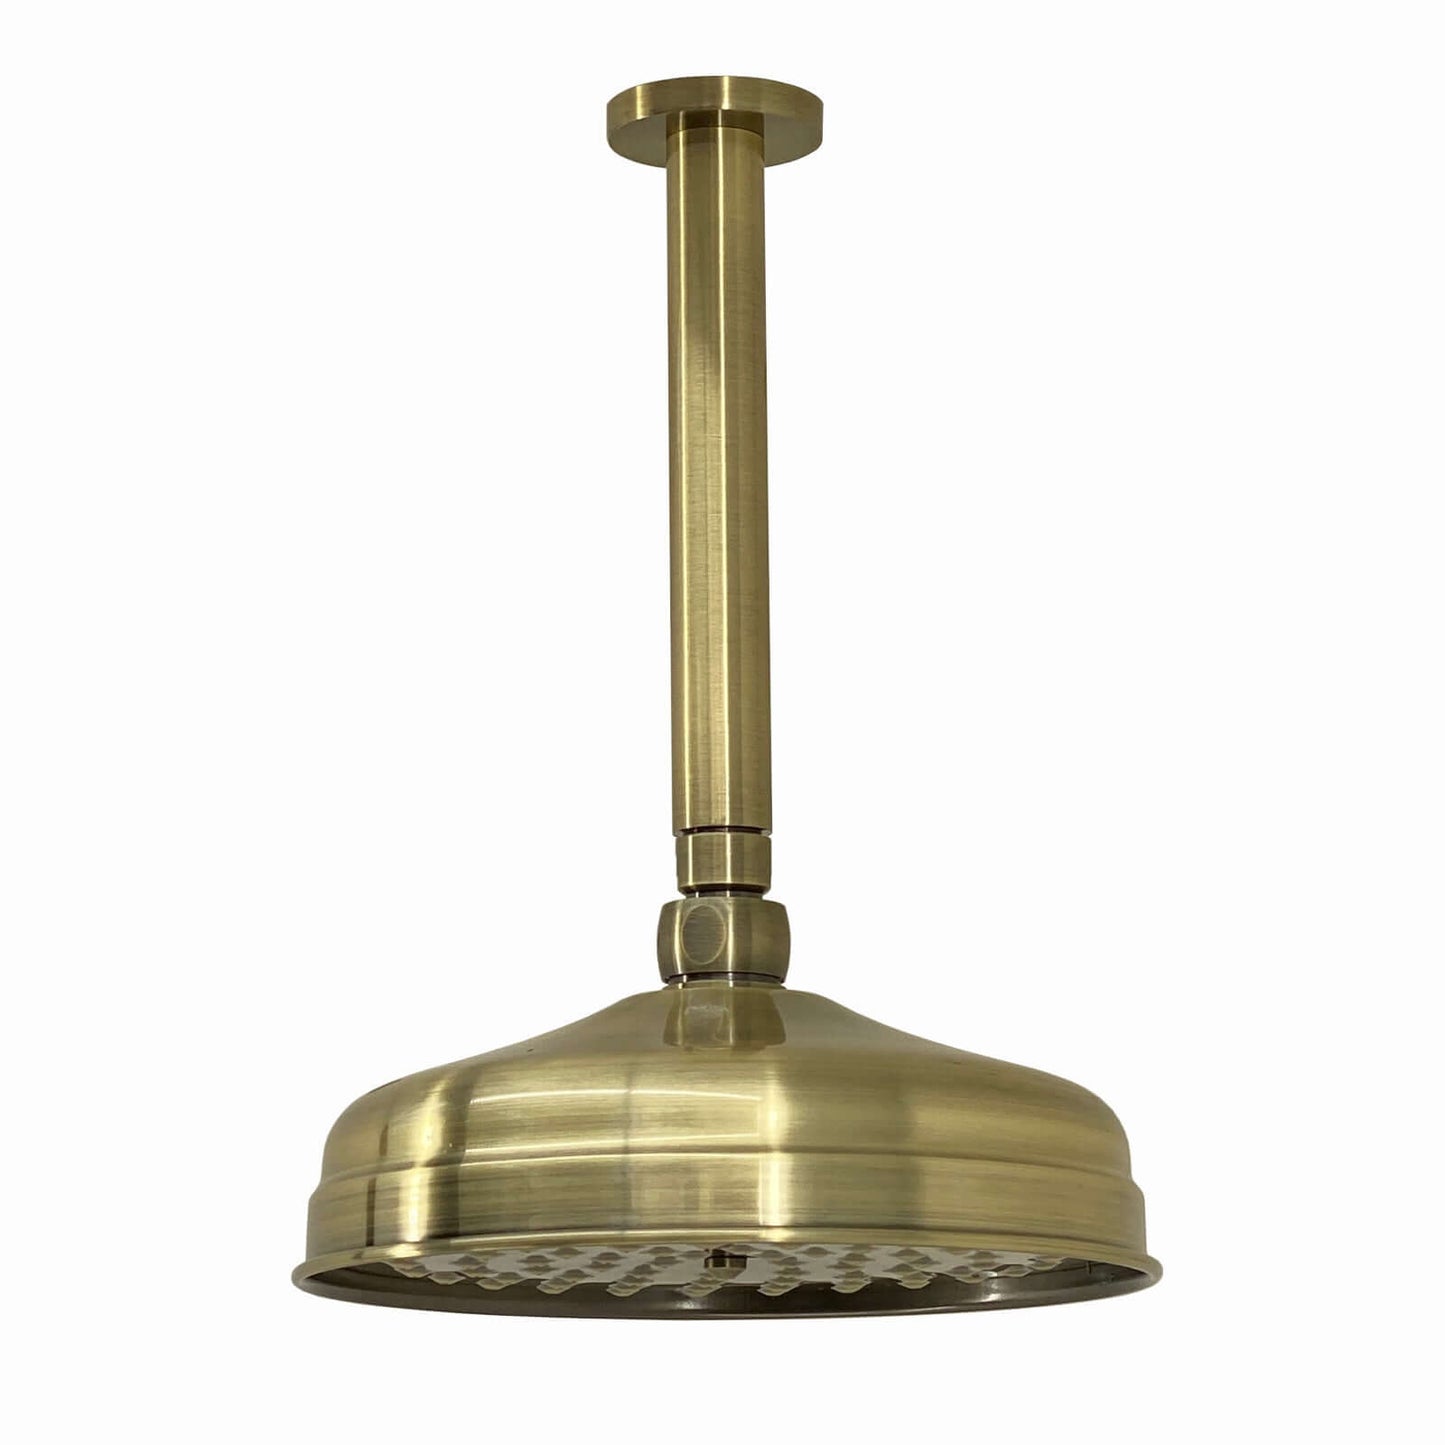 SH0263-03-RA049-01-traditional-ceiling-fixed-apron-brass-shower-head-8-with-180mm-ceiling-shower-arm-antique-bronze